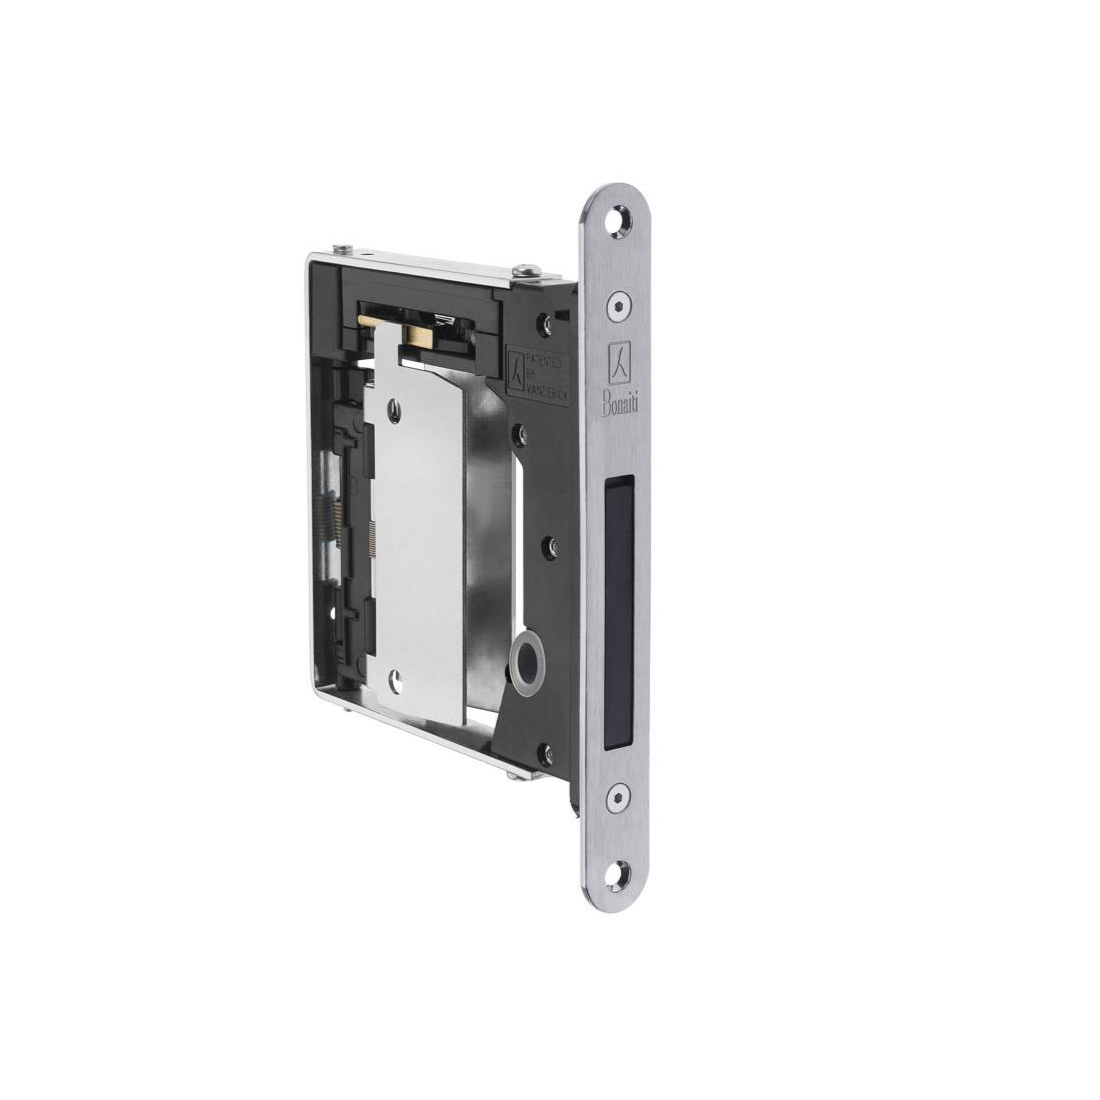 Magnetic Handle-Free Latch by Bellevue Architectural